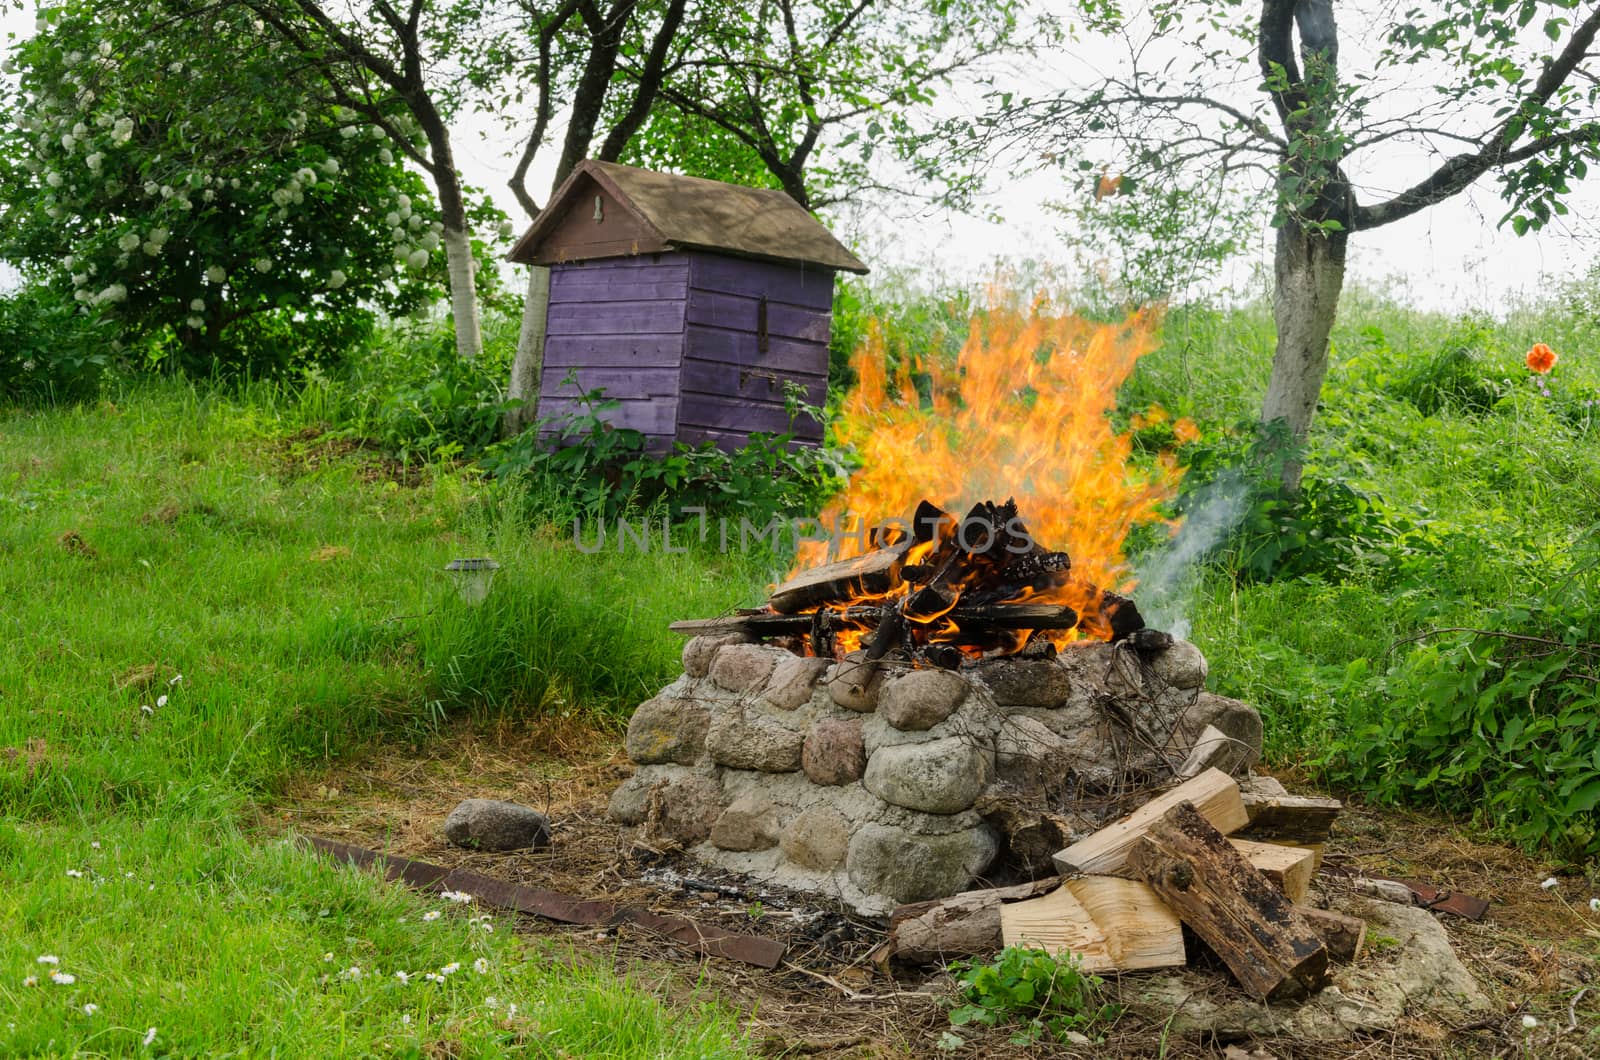 purple wooden bee hive fireplaces ease burn a pile of dry branches